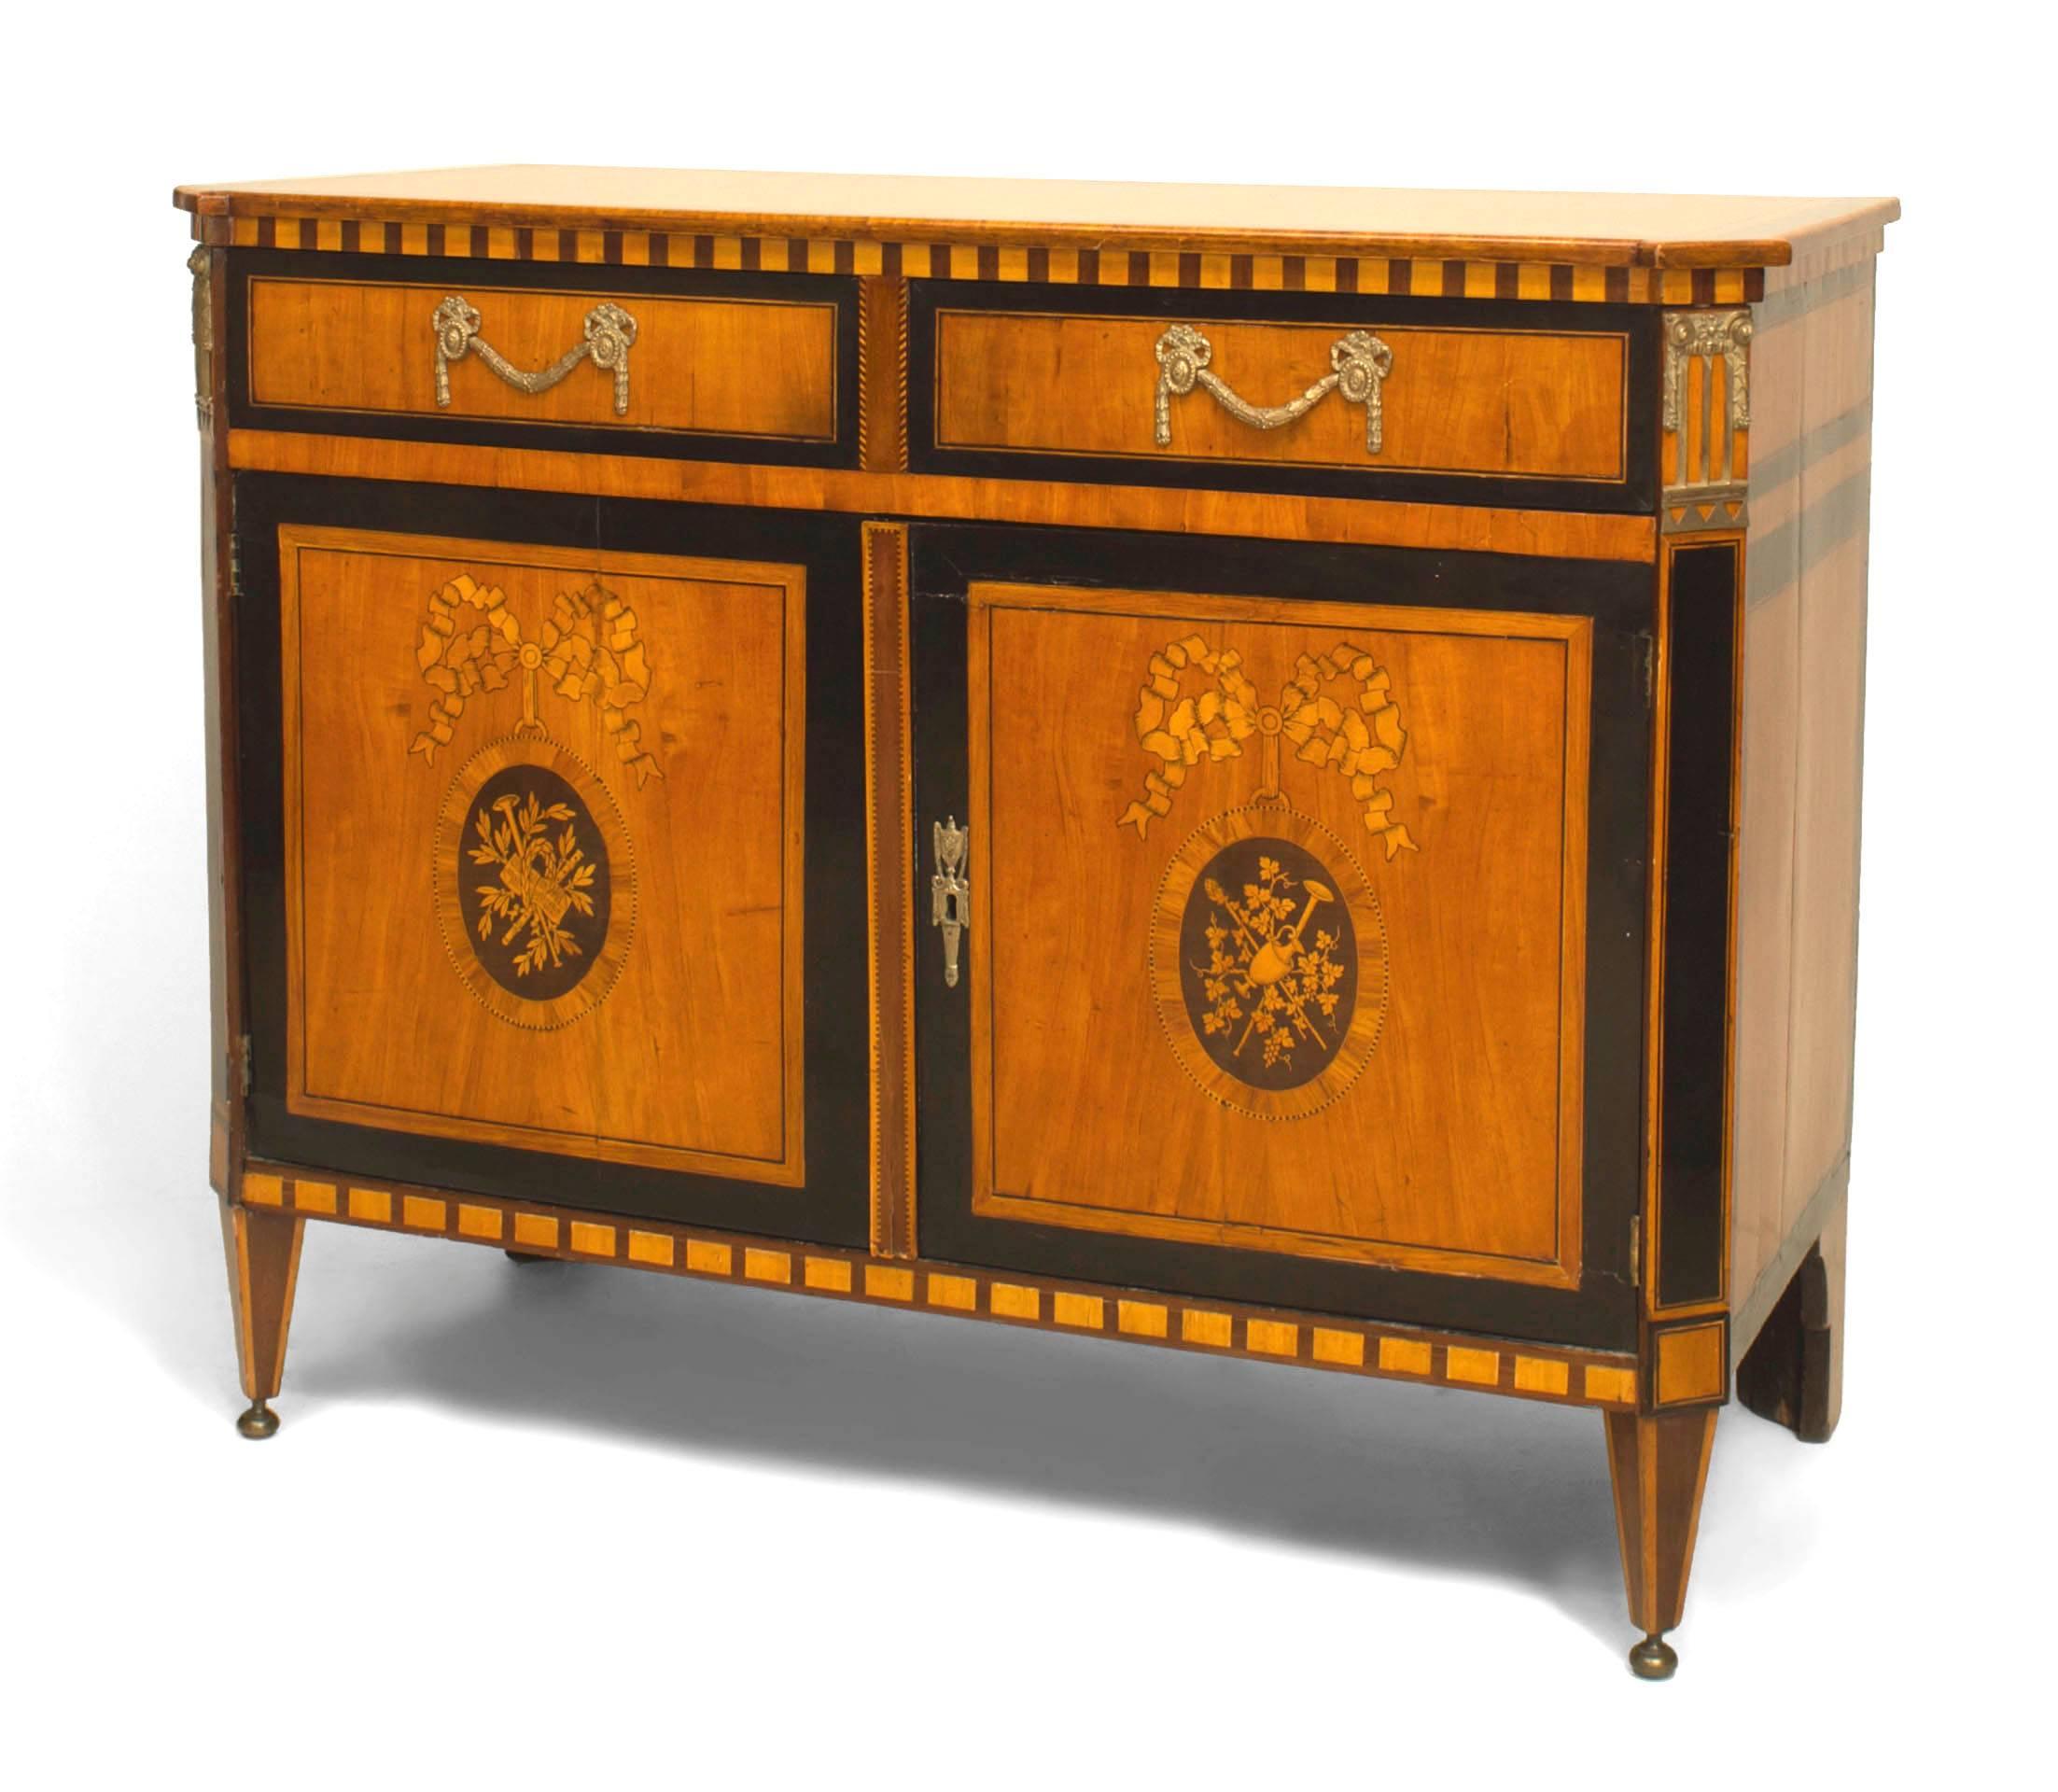 Continental Dutch (18th/19th Century) satinwood commode cabinet with 2 drawers above to doors with floral marquetry panels.
